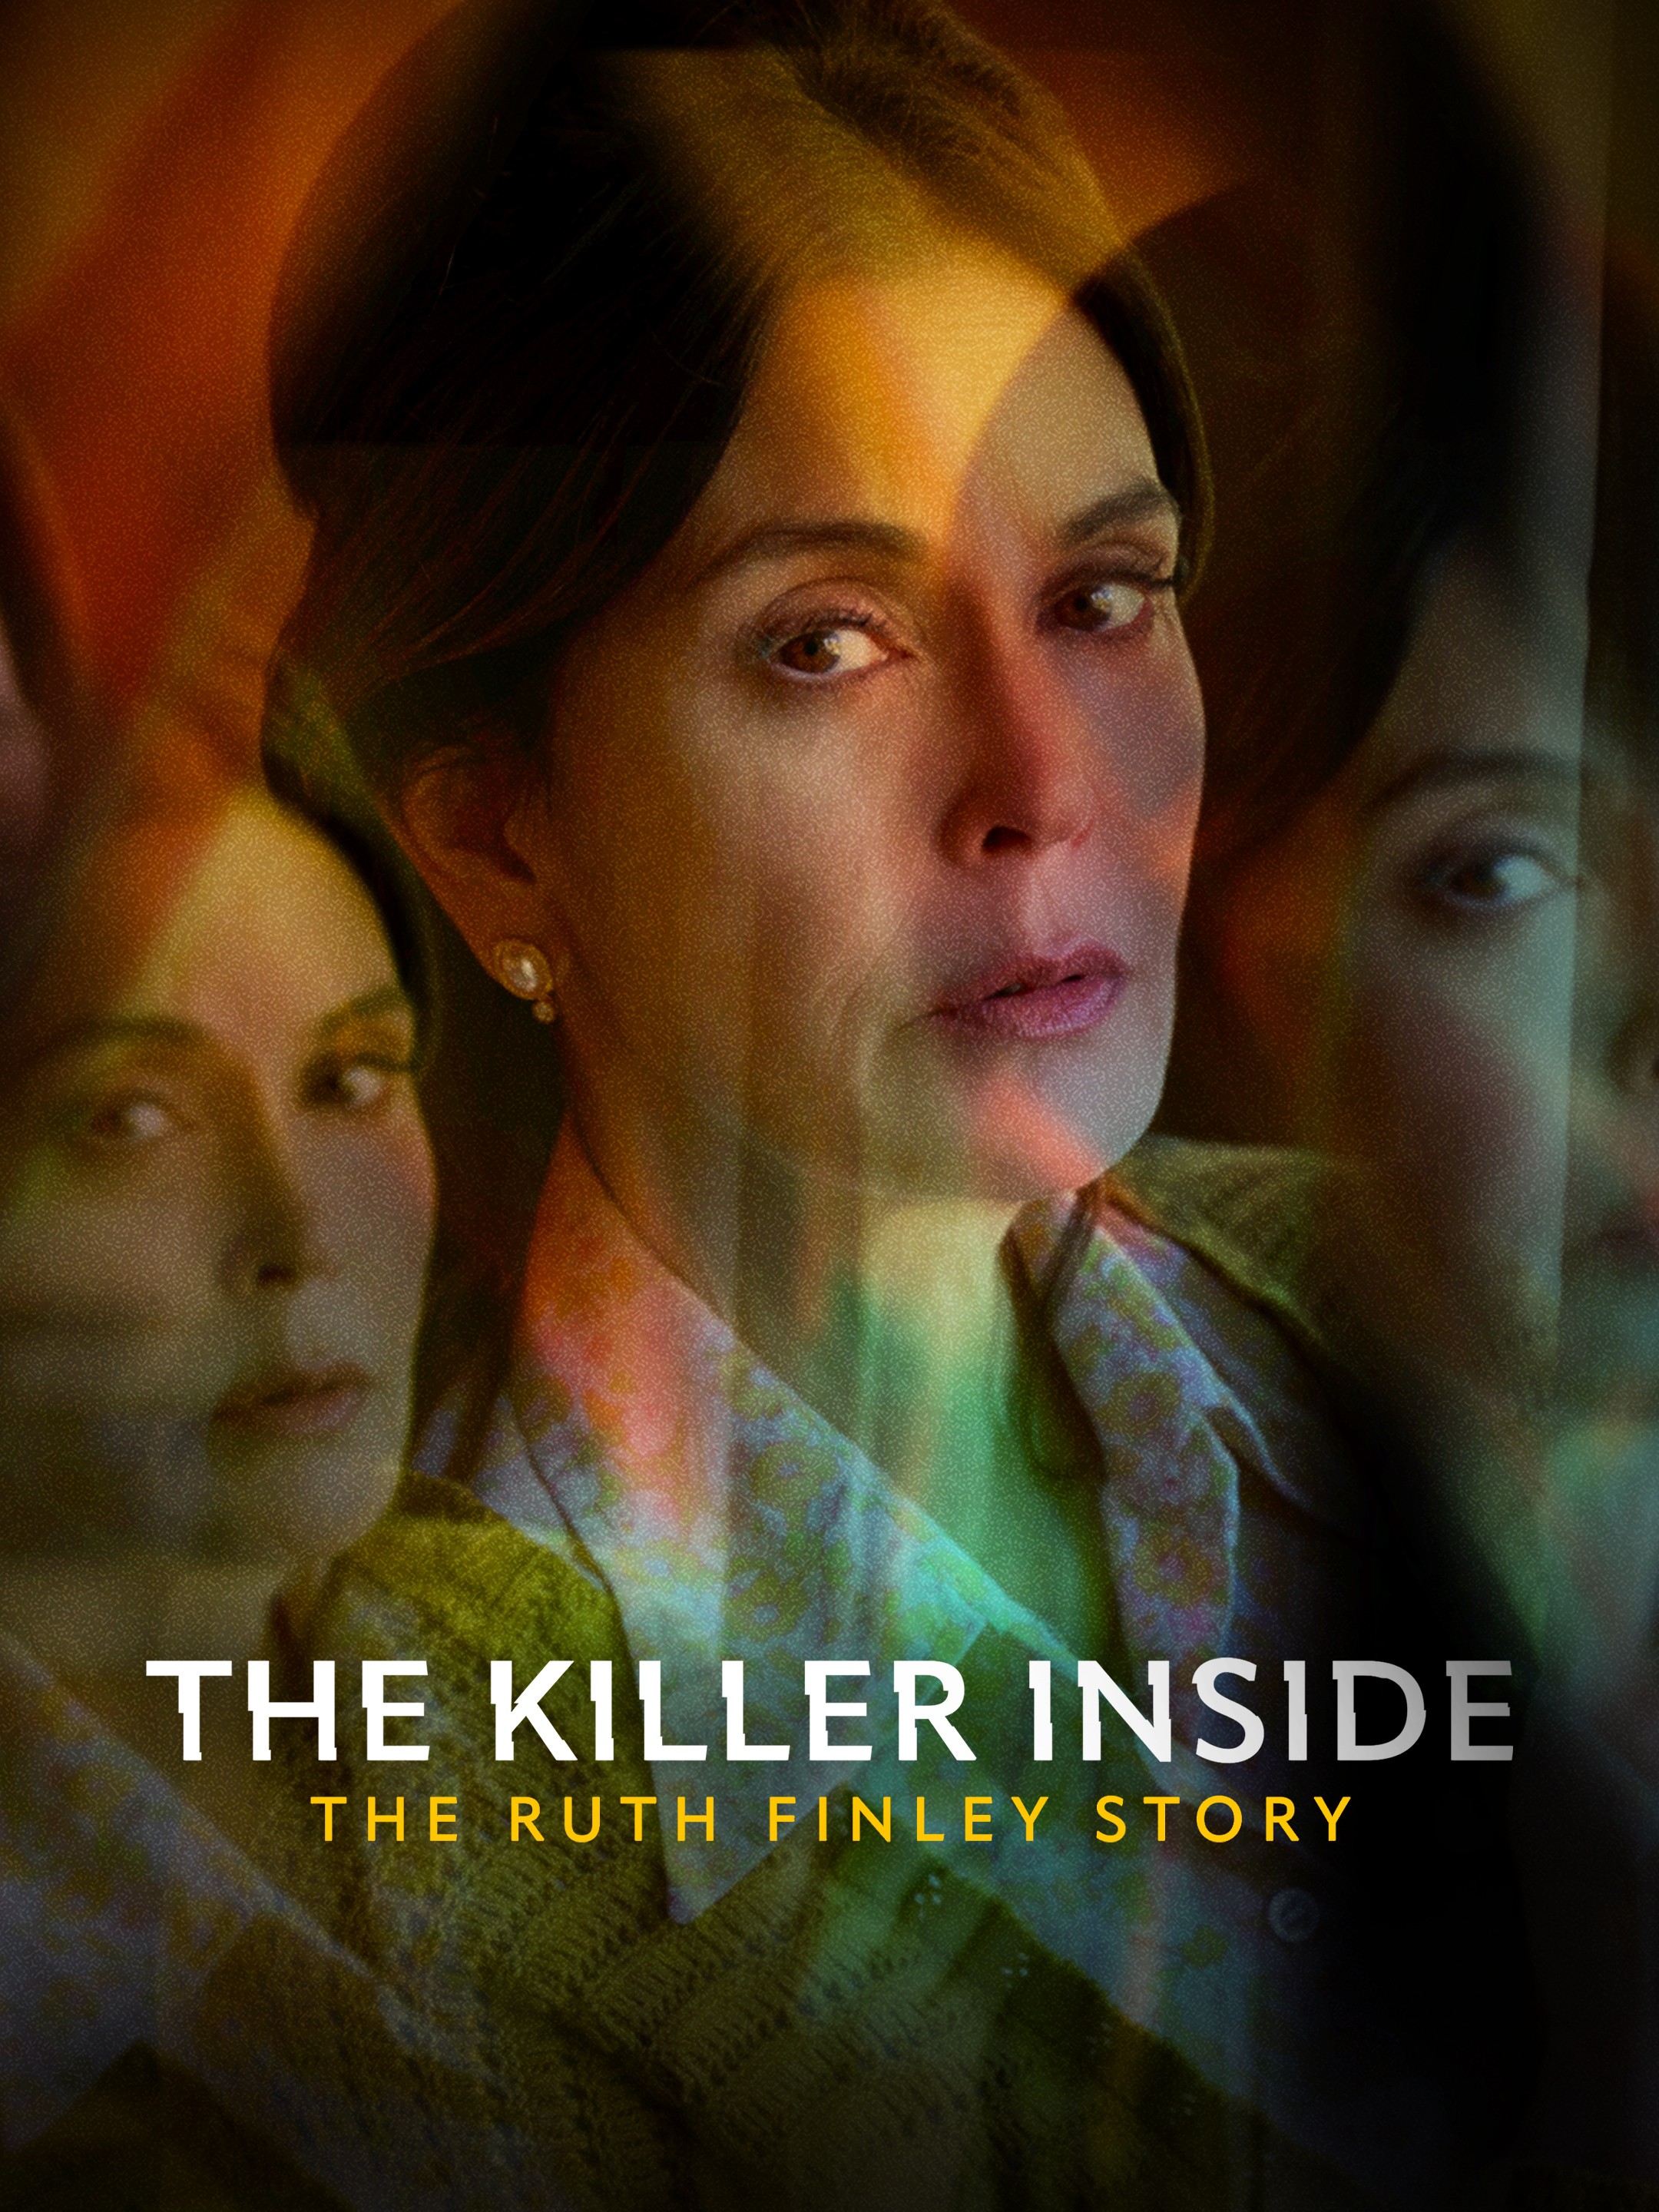 The Killer Inside: The Ruth Finley Story | Rotten Tomatoes